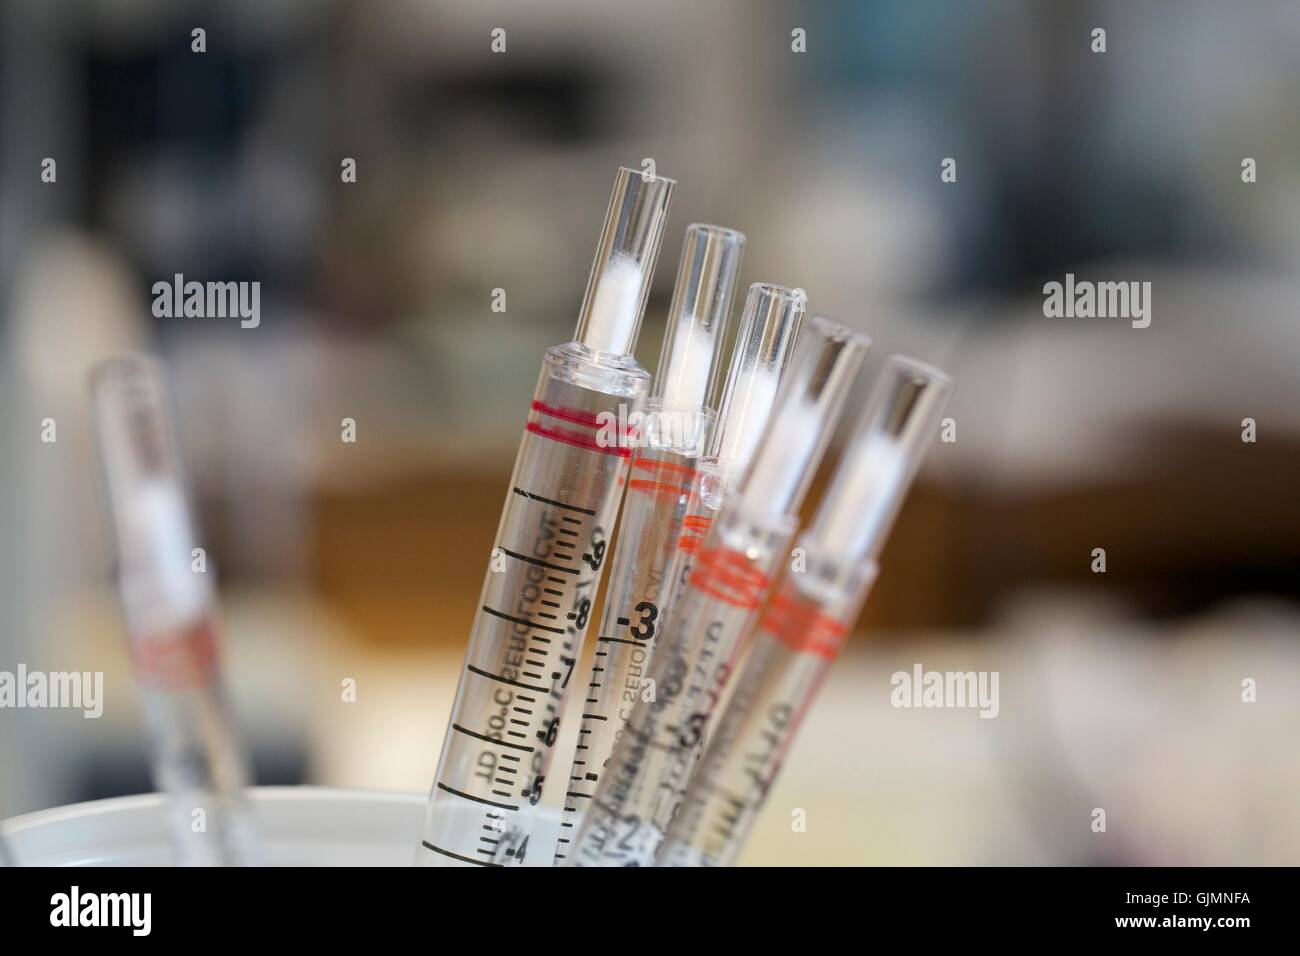 Plastic disposable pipets in research laboratory Stock Photo